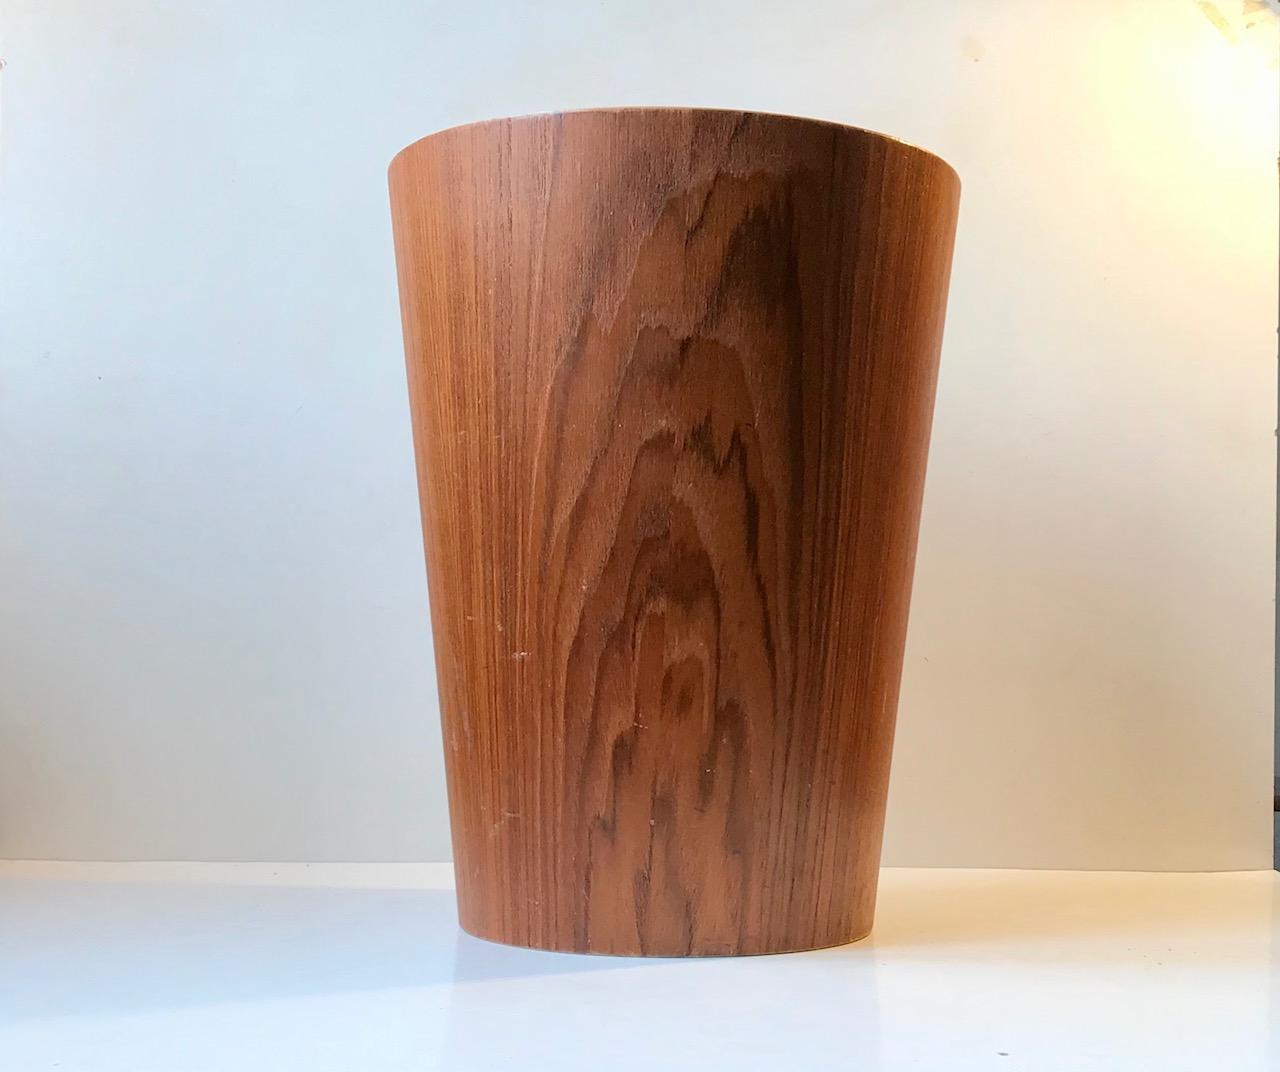 Mid-Century Modern circular teak waste basket designed by Martin Åberg for the Swedish company Servex in 1955. It features original makers mark and design number stamped underneath the base. The teak has a beautiful grain and patina.